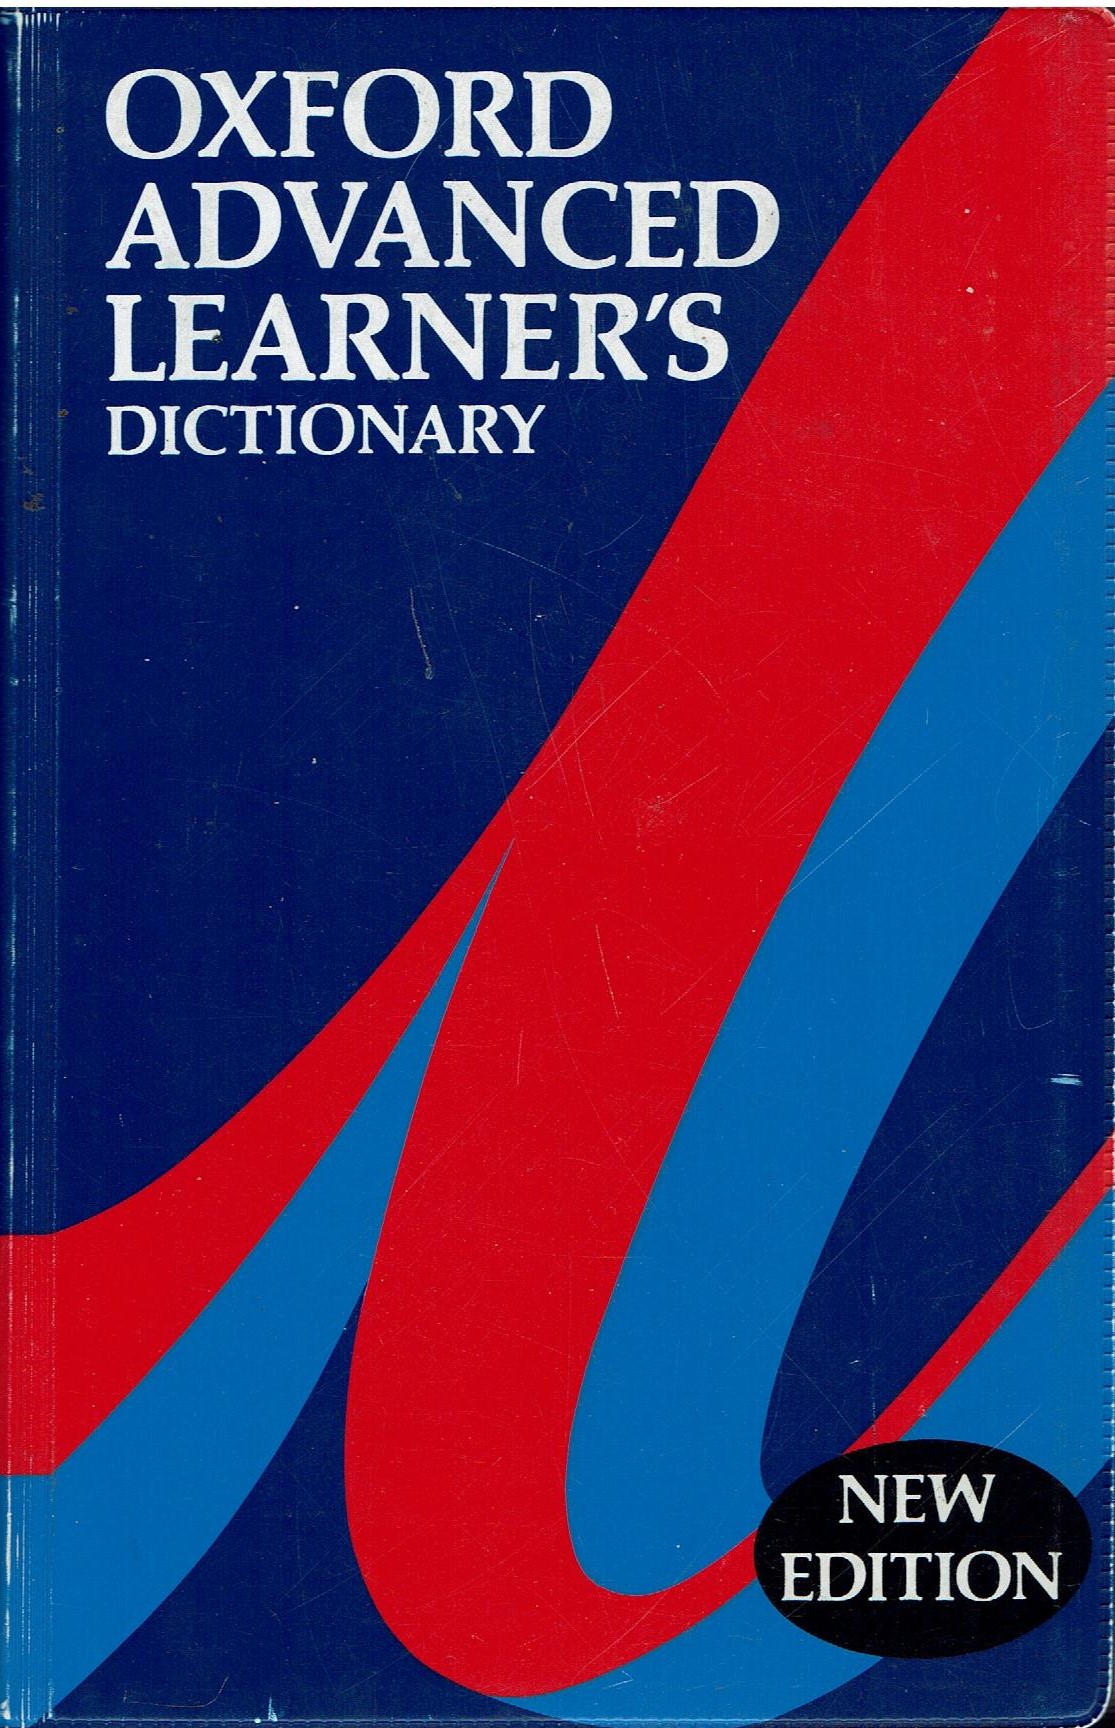 Advanced learner s dictionary. Hornby's Oxford Advanced Learners Dictionary. Oxford Advanced Learner's Dictionary of current English. The Advanced Learner's Dictionary of current English страница. The Advanced Learner's Dictionary of current English авторы.